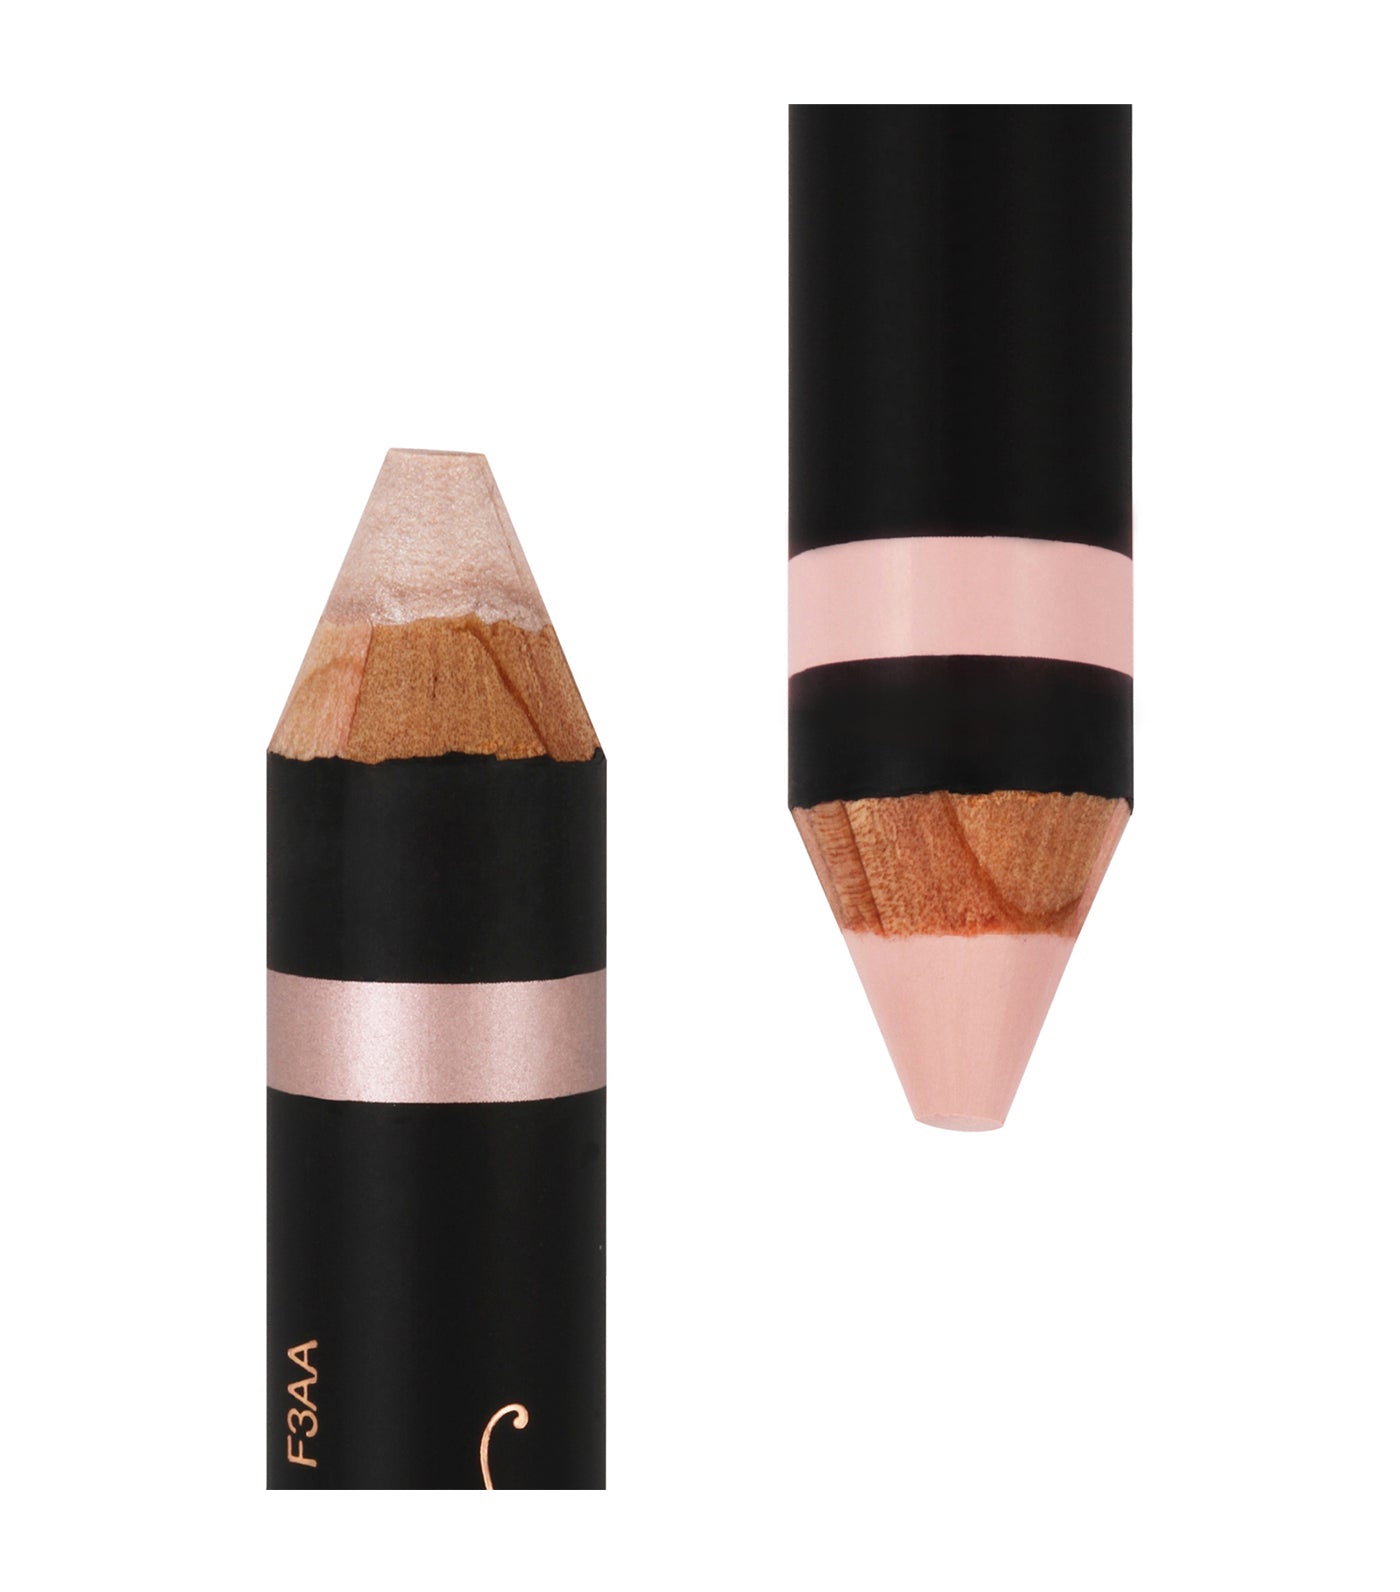 anastasia beverly hills camille/sand shimmer highlighting duo pencil